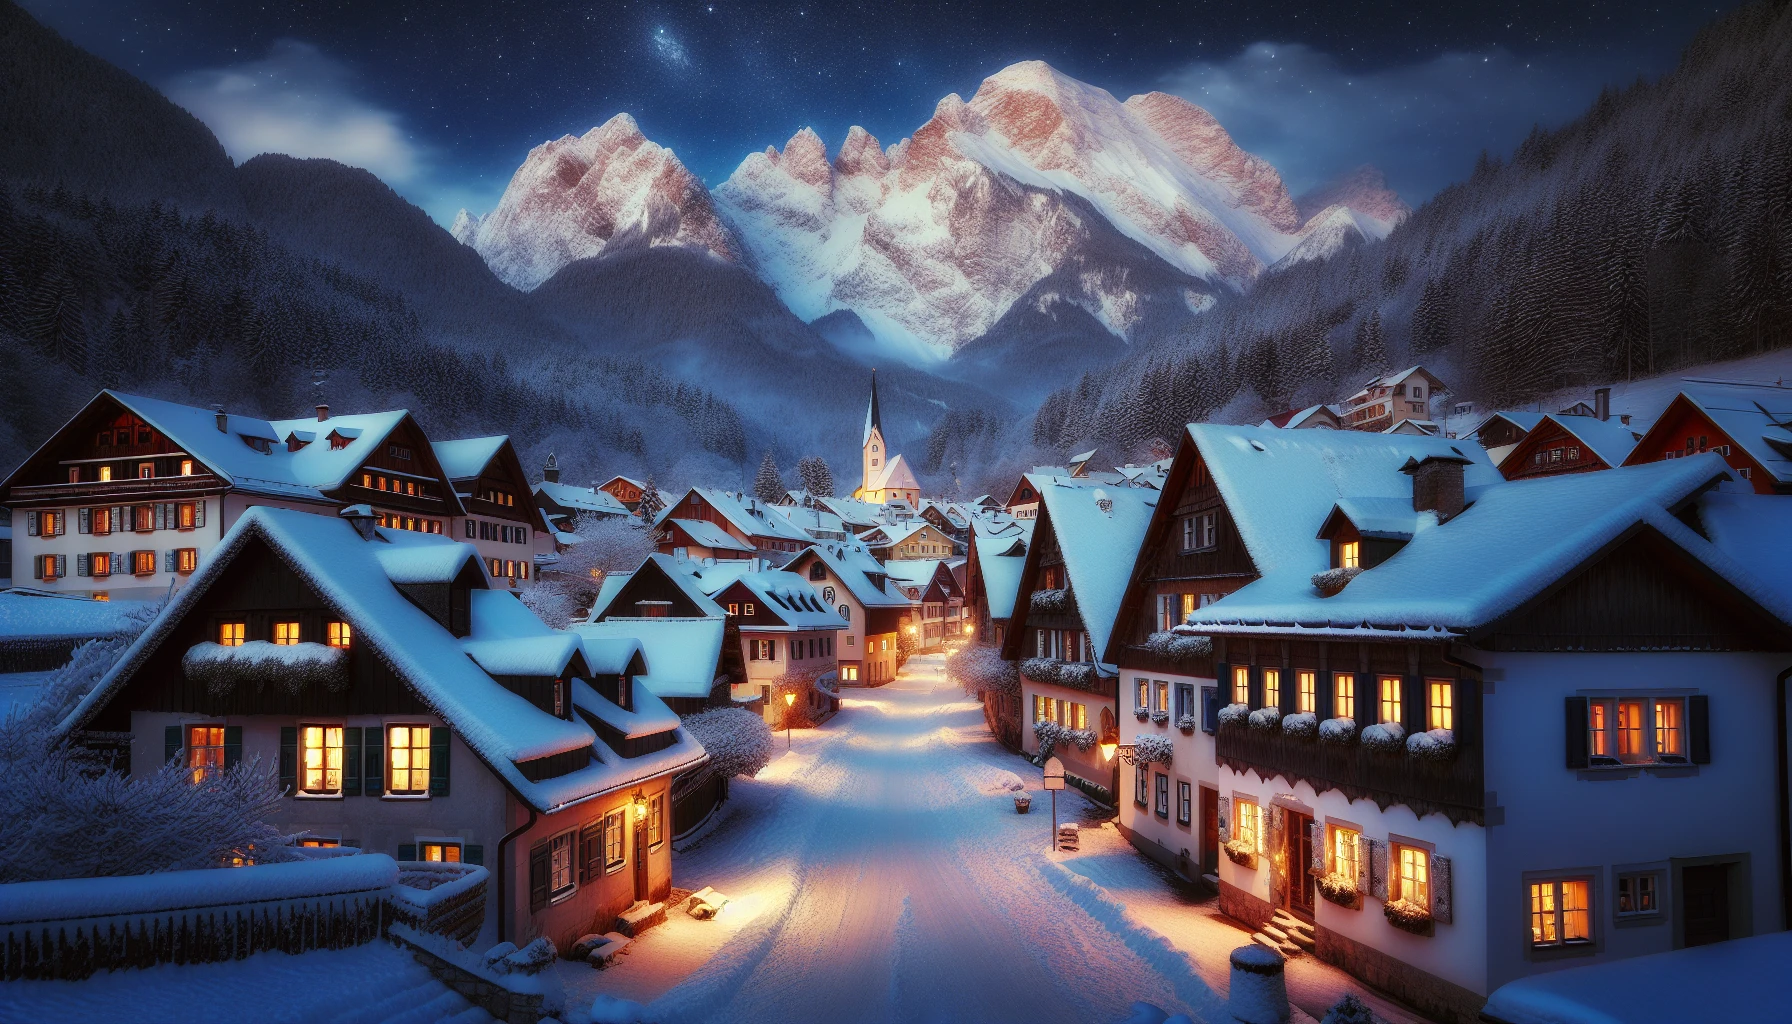 Cozy Mystery Novels to Curl Up With: A quaint snowy town with charming old buildings